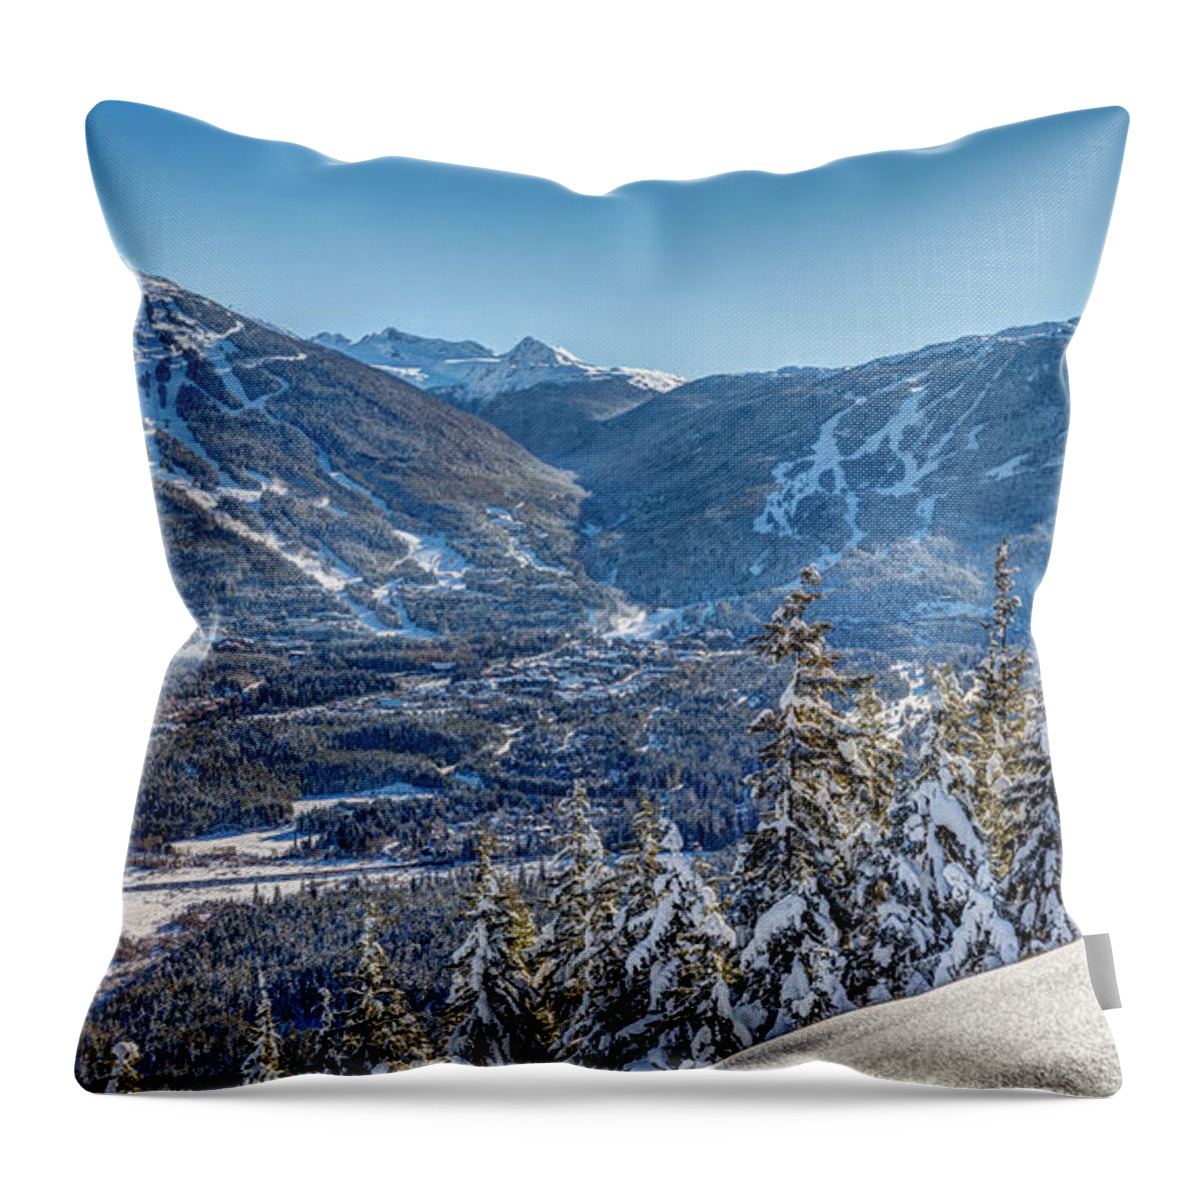 Whistler Throw Pillow featuring the photograph Whistler Blackcomb Winter Wonderland by Pierre Leclerc Photography